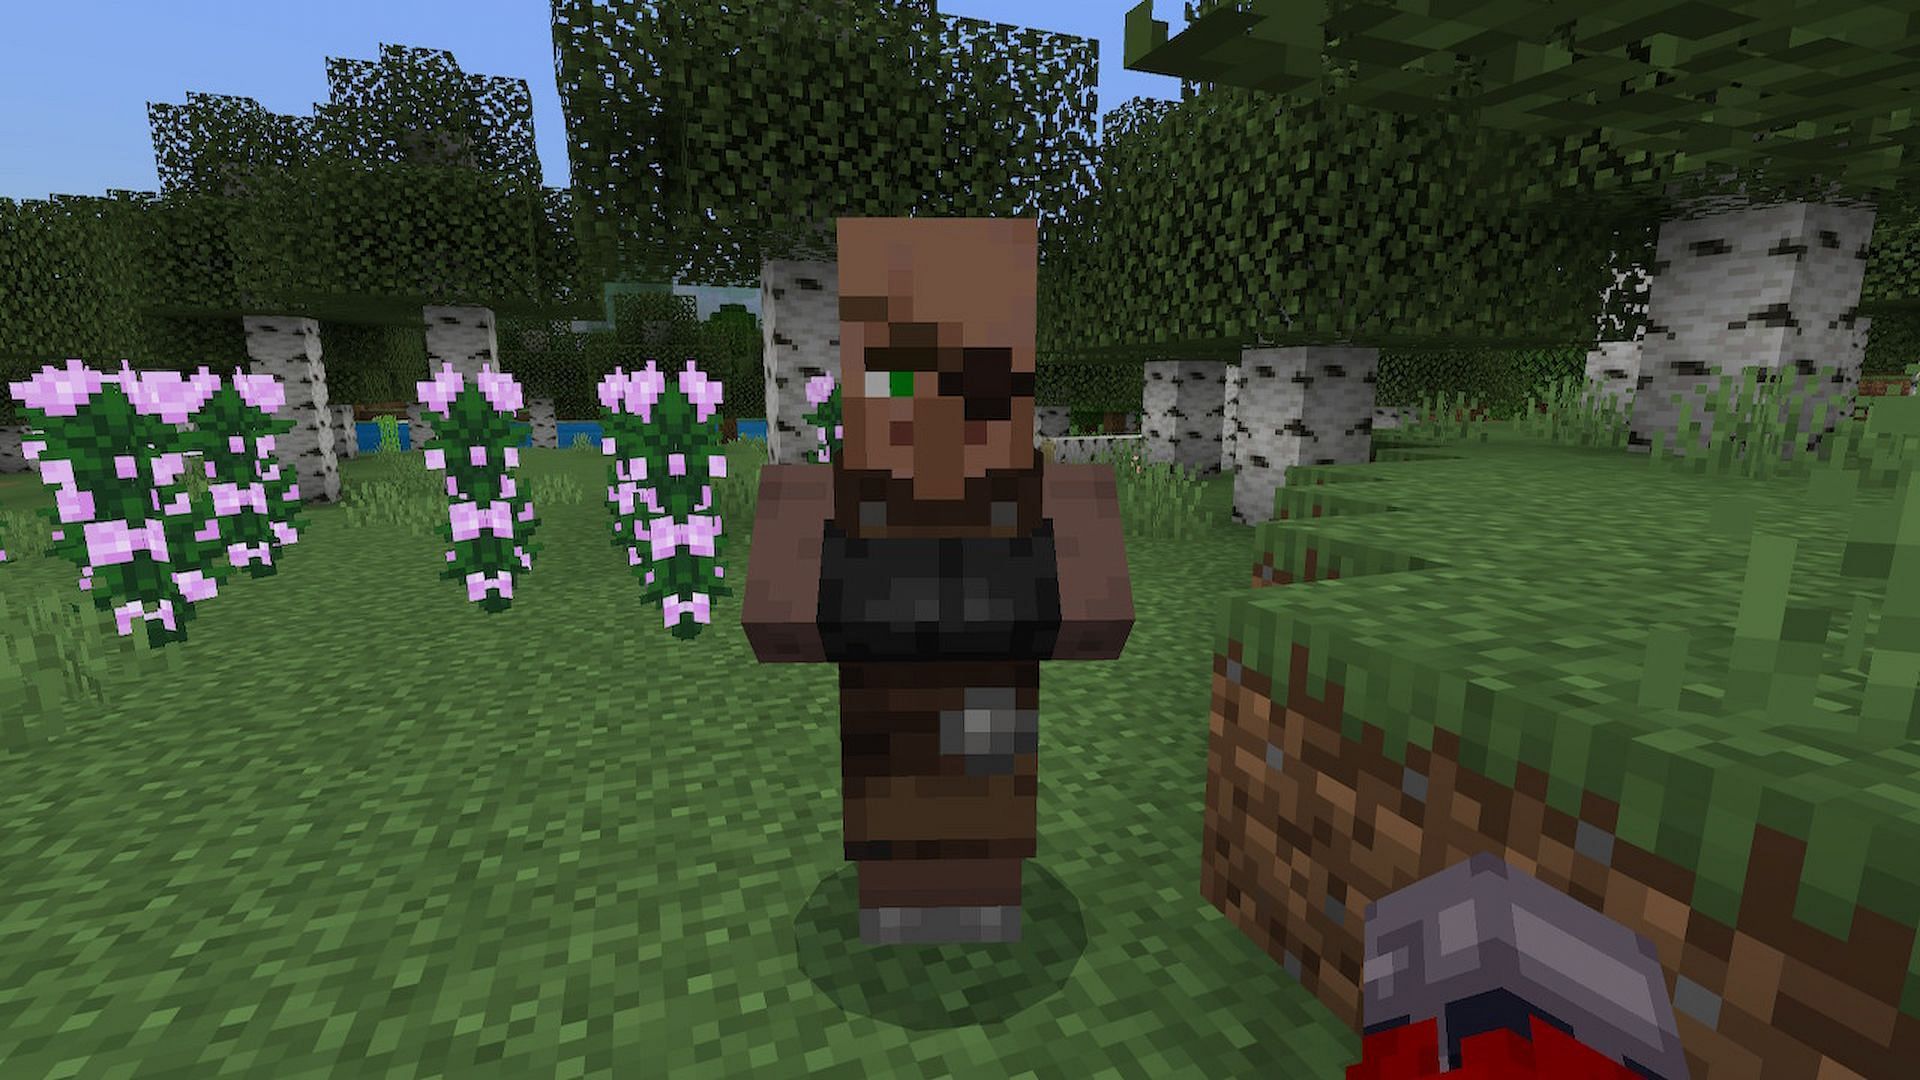 weaponsmith villager